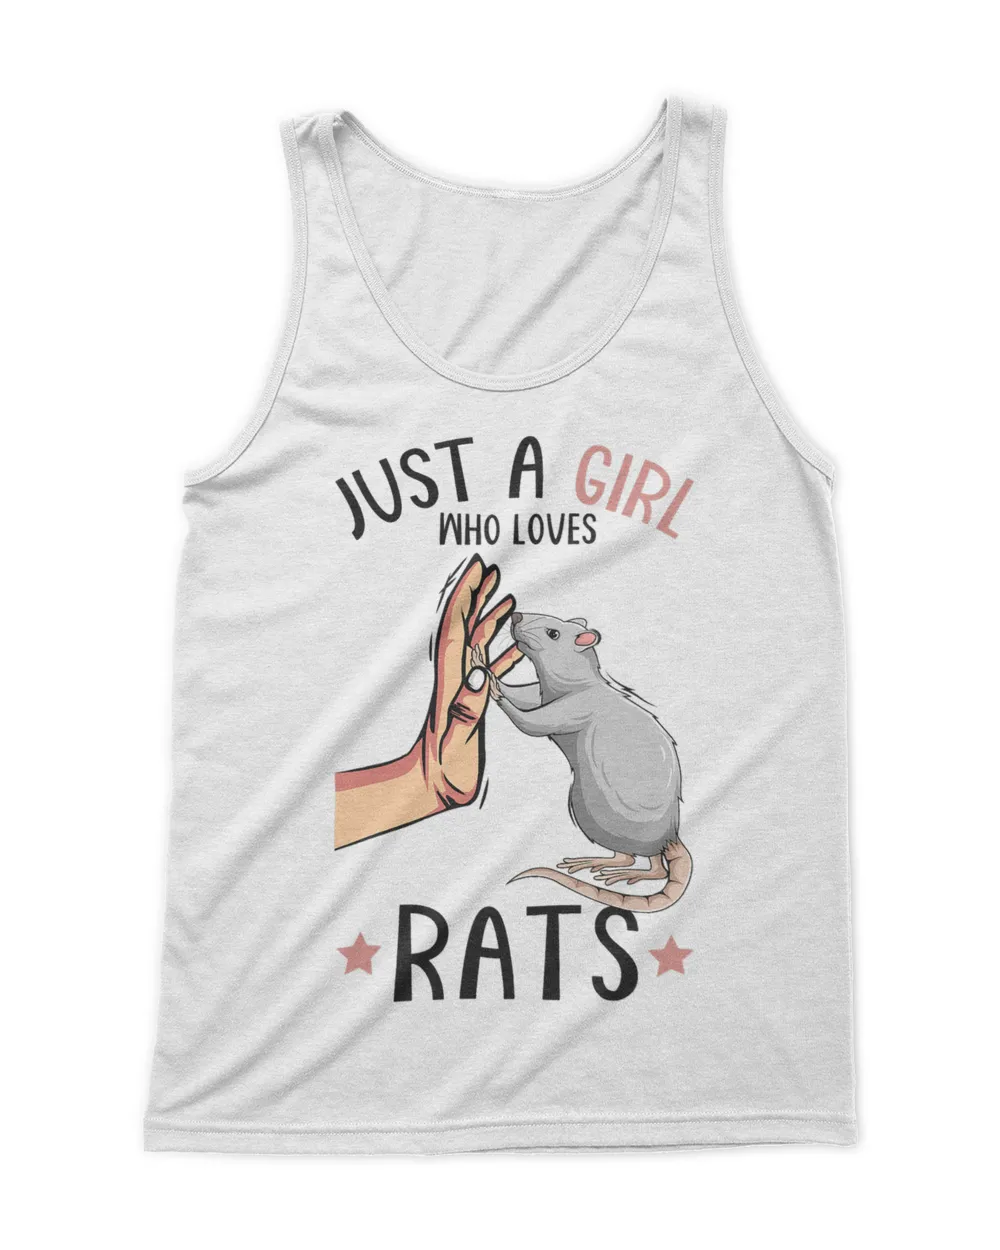 Just A Girl Who Loves Rats Women Girls Rat Lover